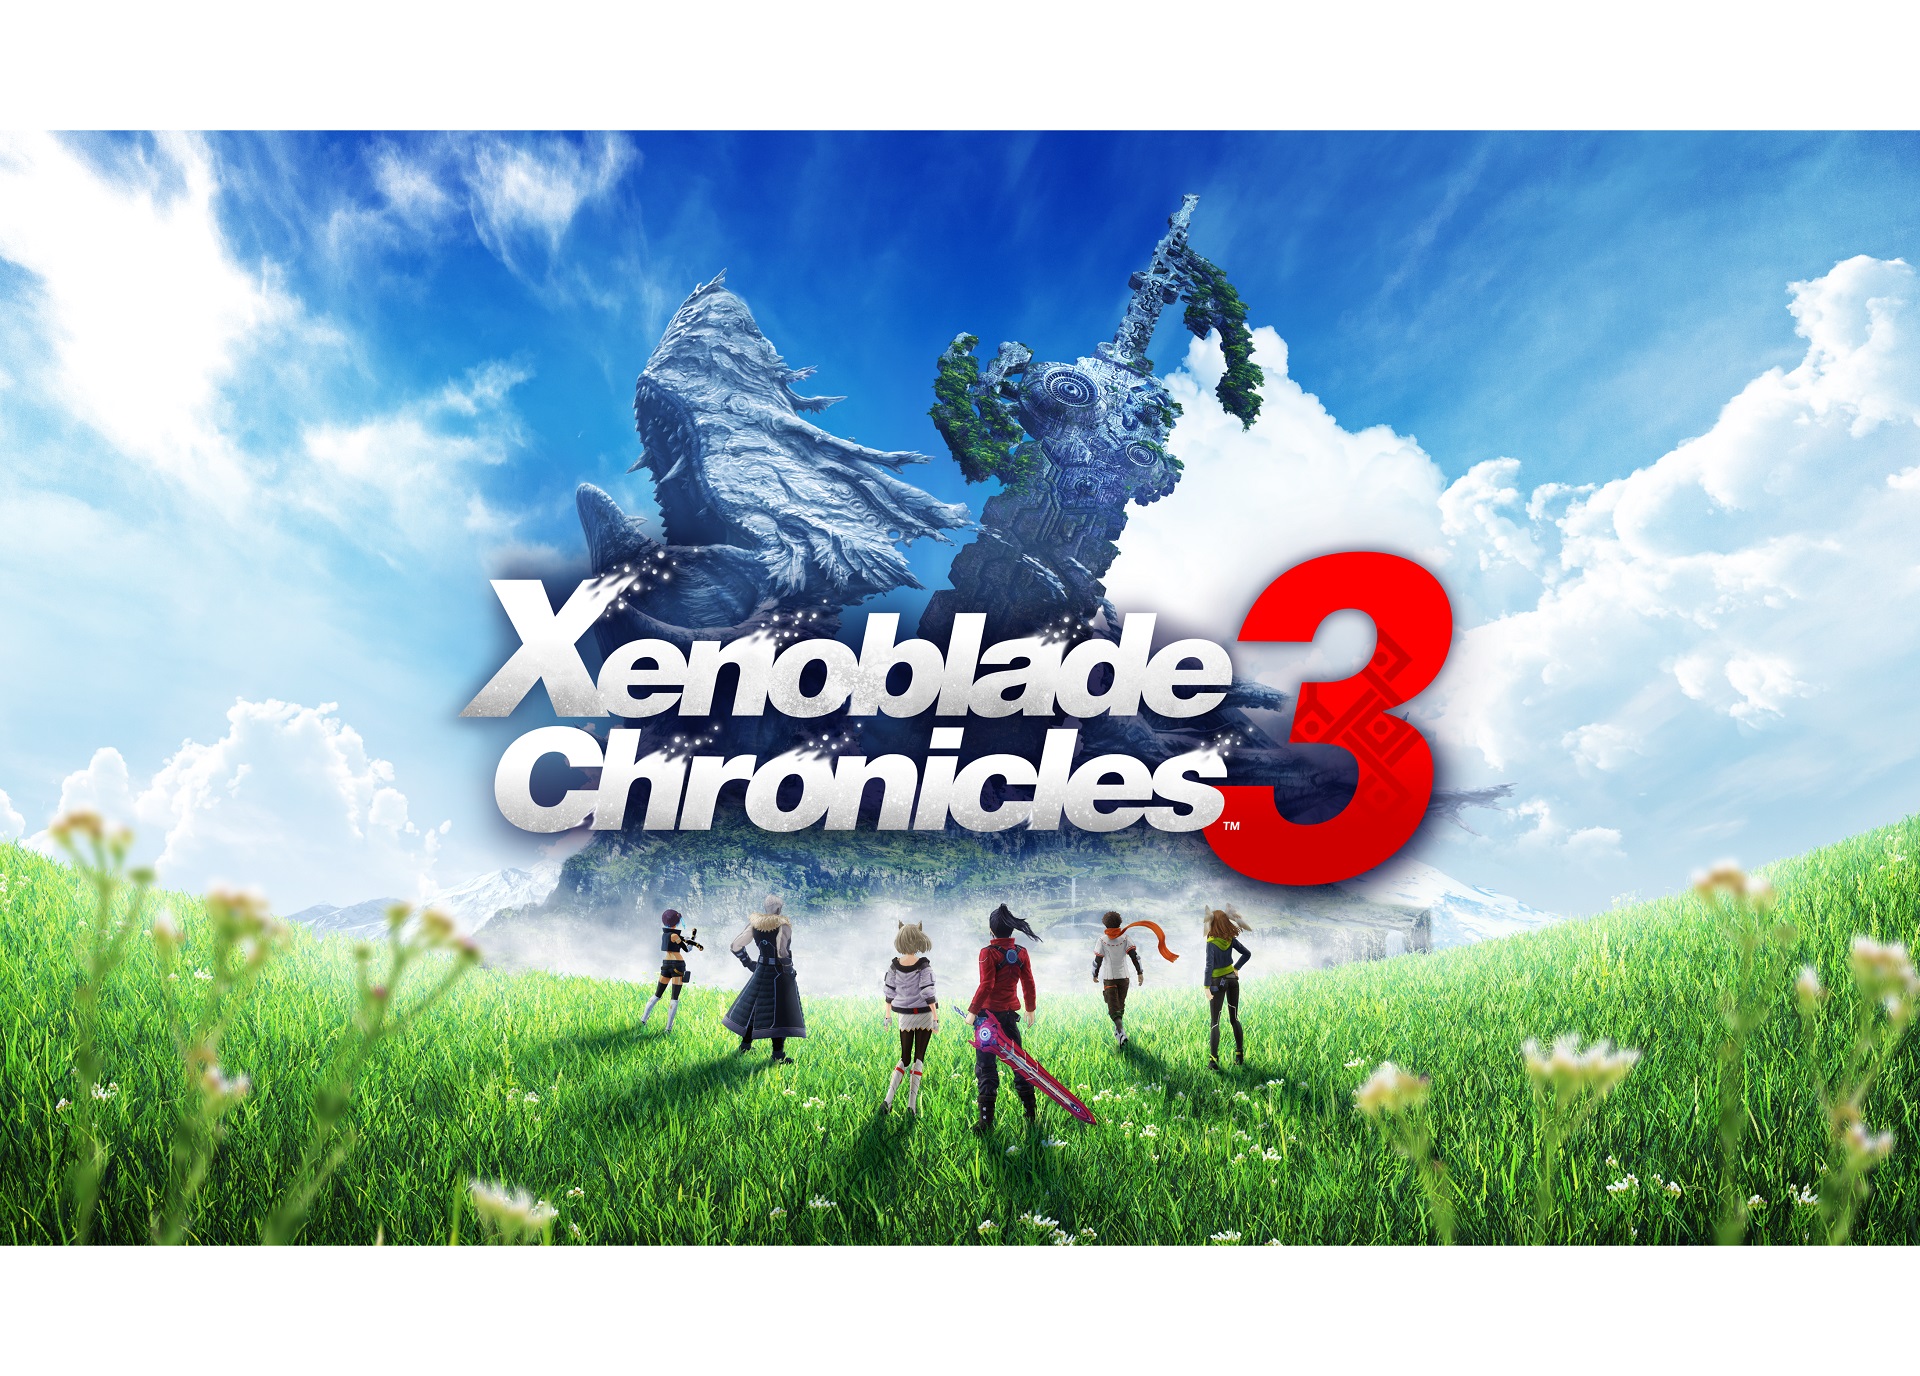 Xenoblade Chronicles 3 is now available on Nintendo Switch